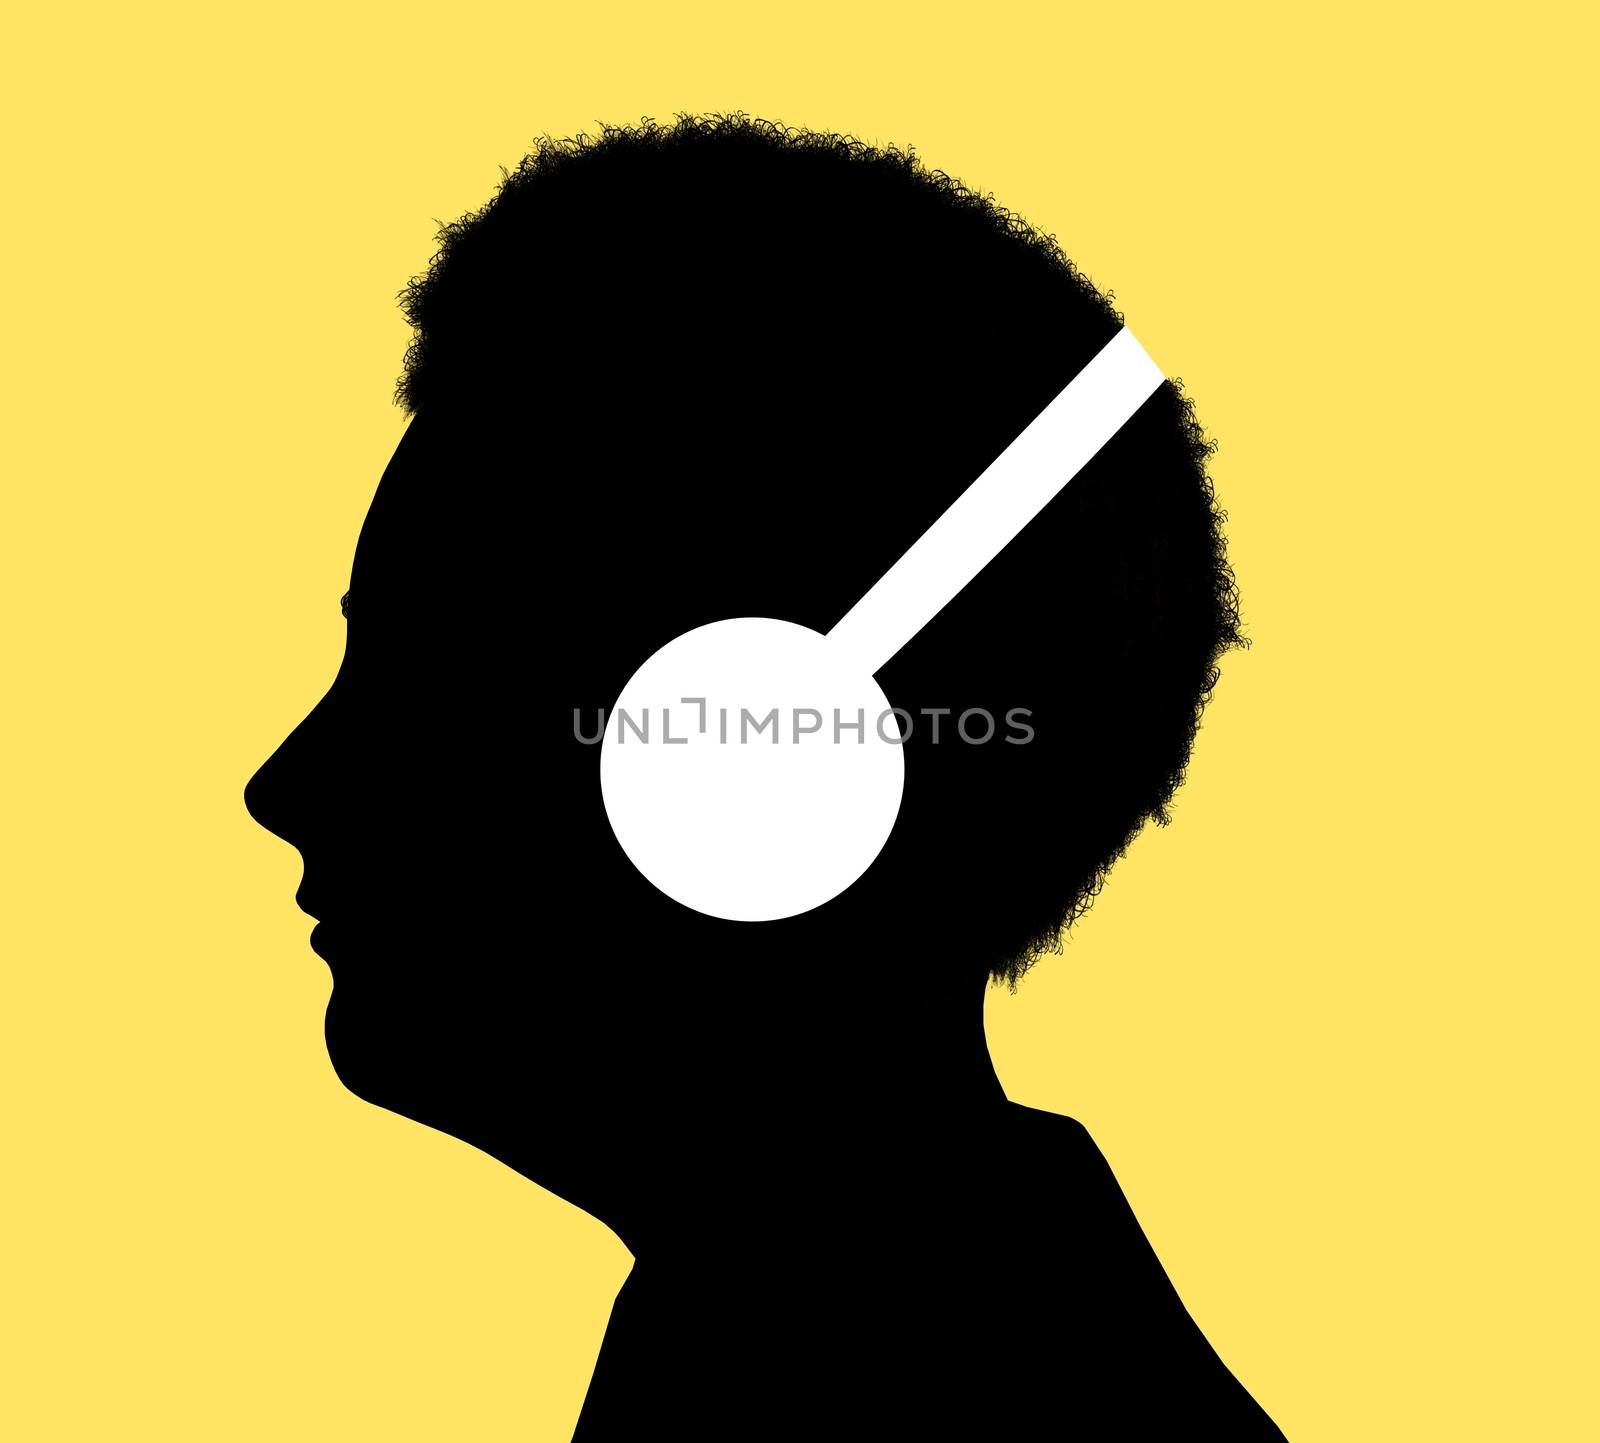 Illustrated silhouette of a person enjoying music, having a hearing test or learning with audio